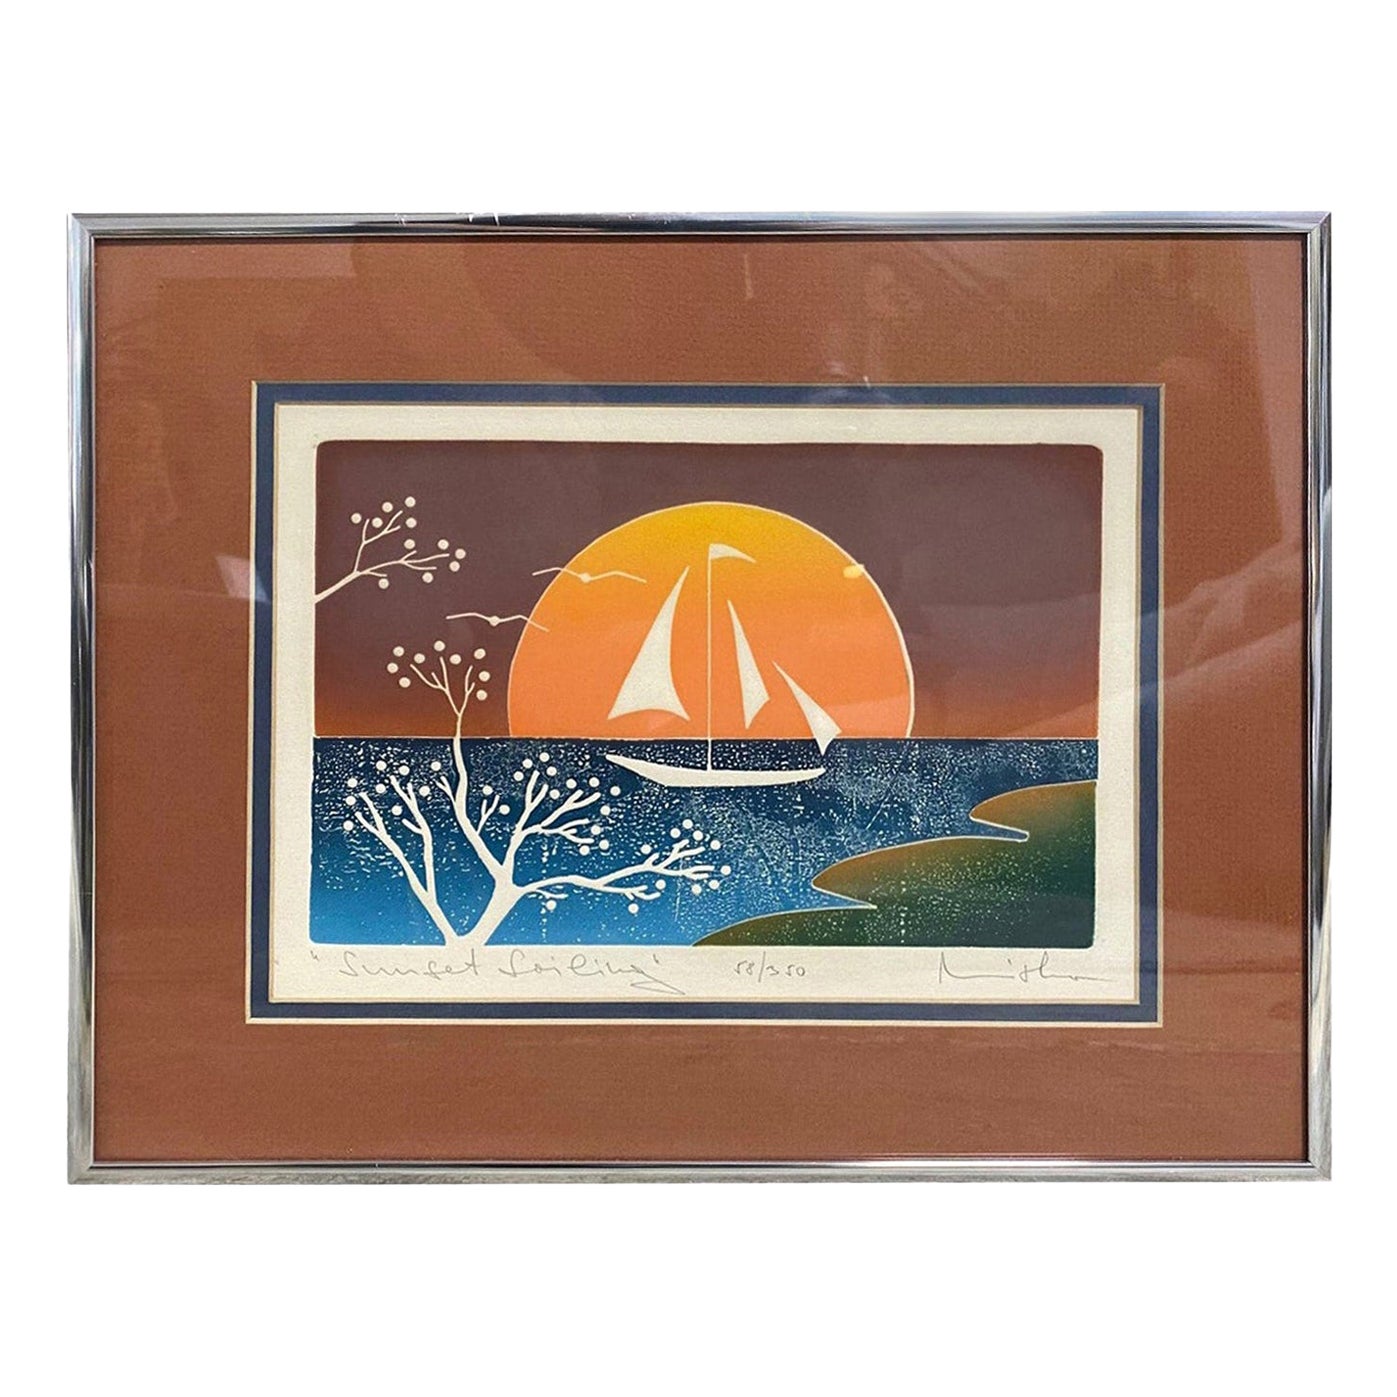 Signed Limited Edition Modern Abstract Japanese Woodblock Print Sunset Sailing